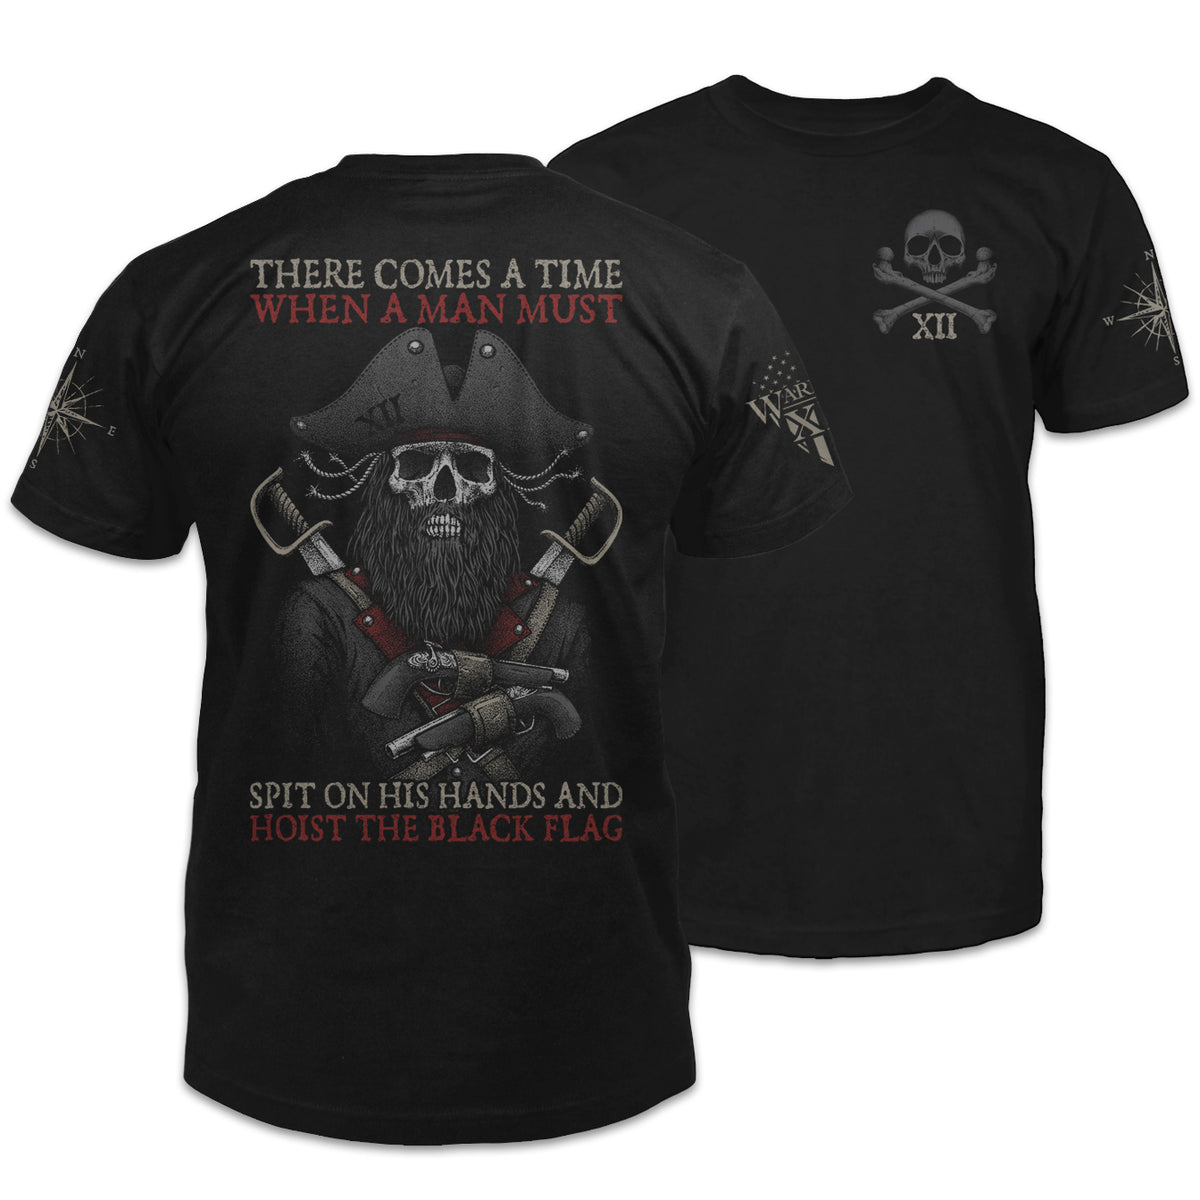 Front & back black t-shirt with the words "There comes a time when a man must spit on his hands and hoist the black flag" with the skull of blackbeard printed on the shirt.